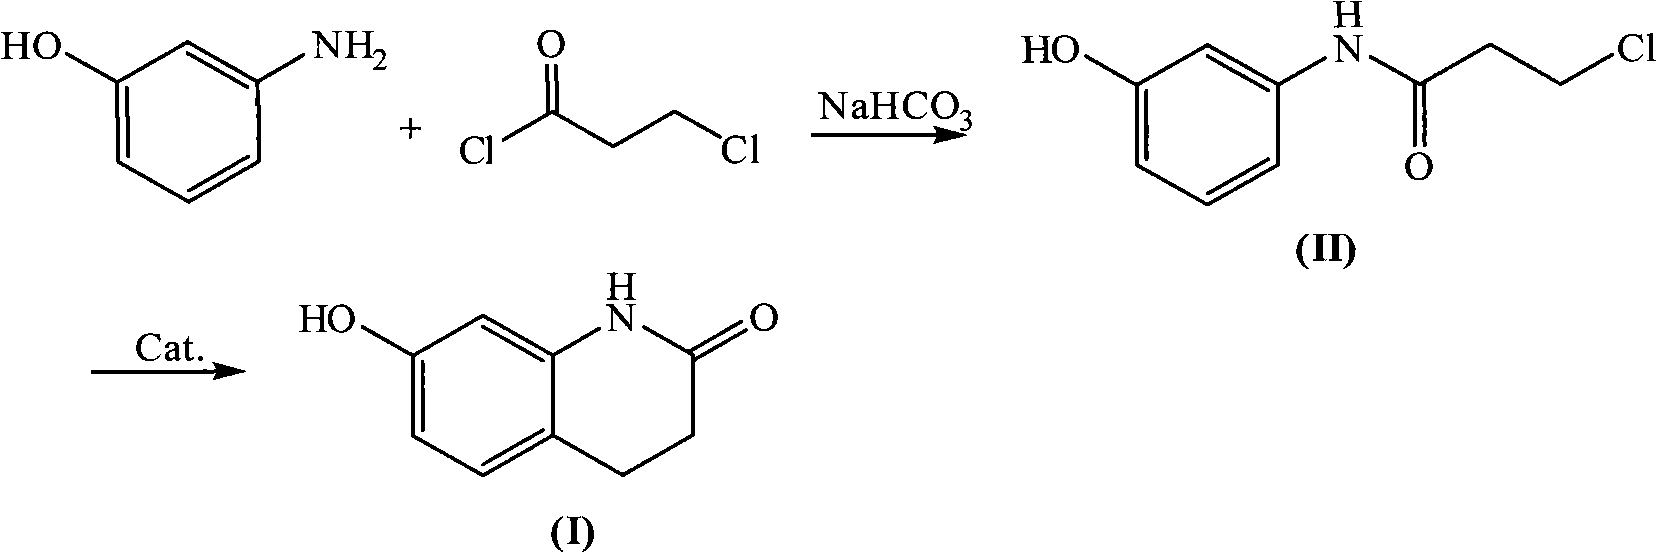 Novel synthetic method of 7-hydroxy-3,4-dihydroquinolines